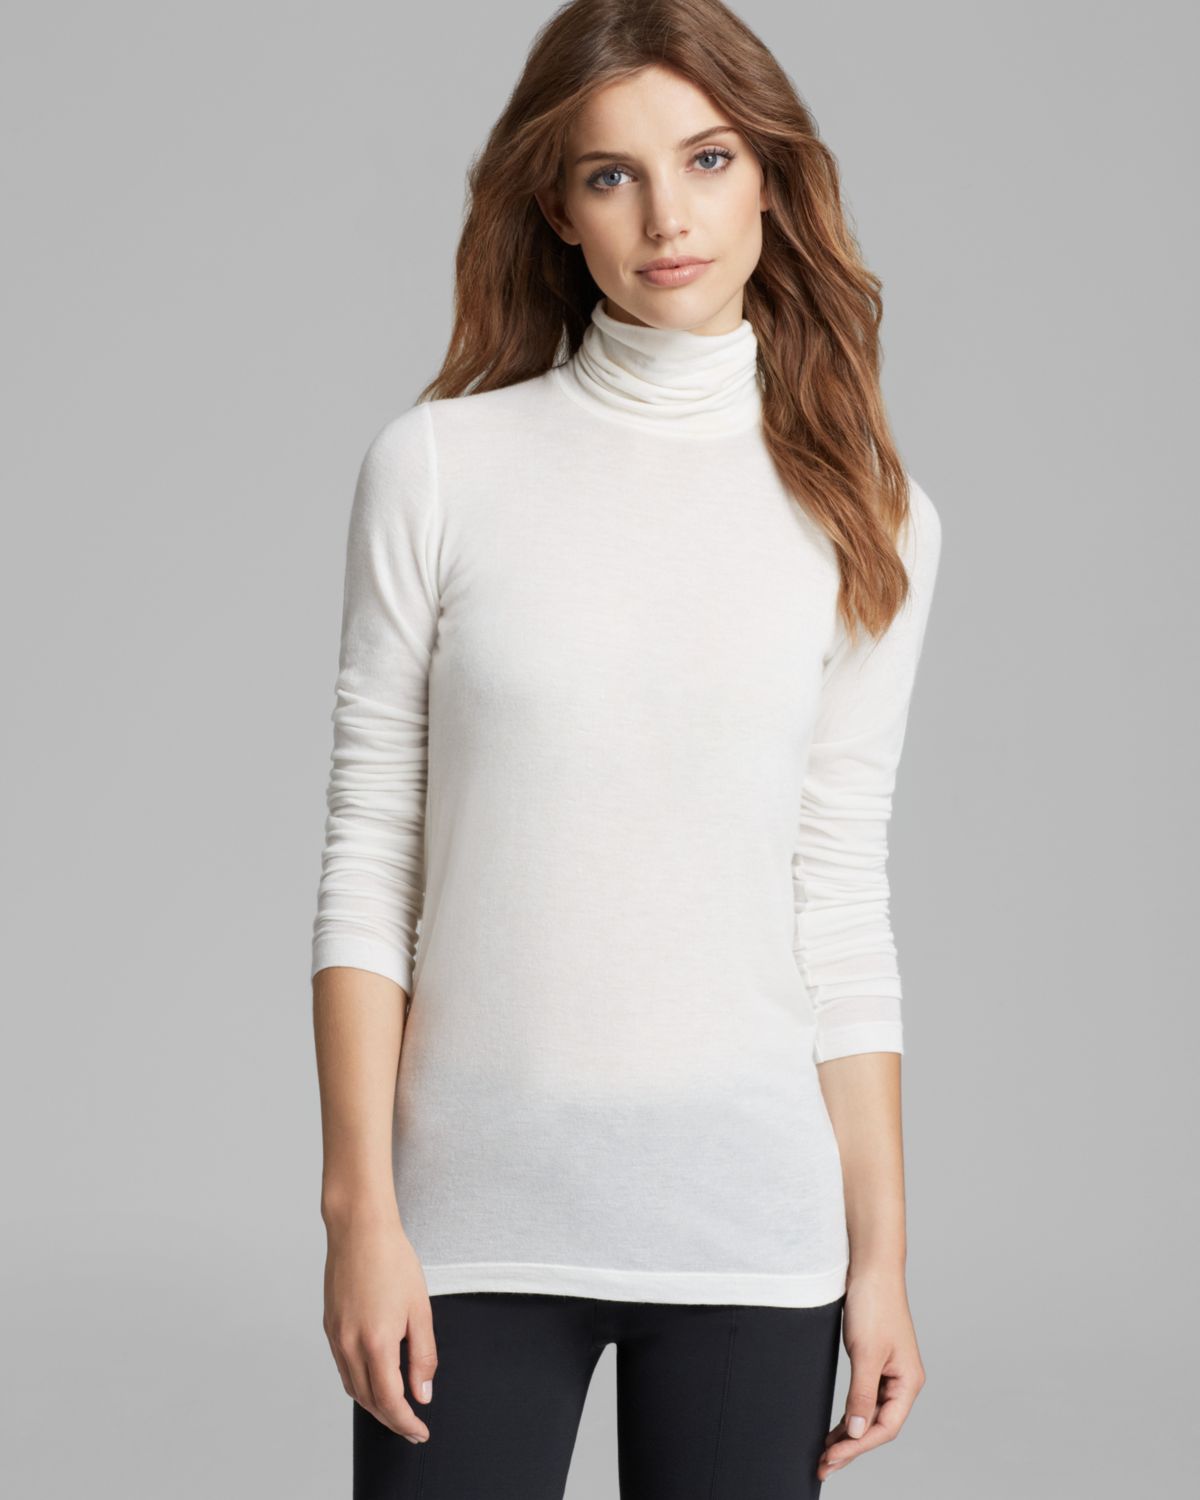 Vince Top Turtleneck in White - Lyst